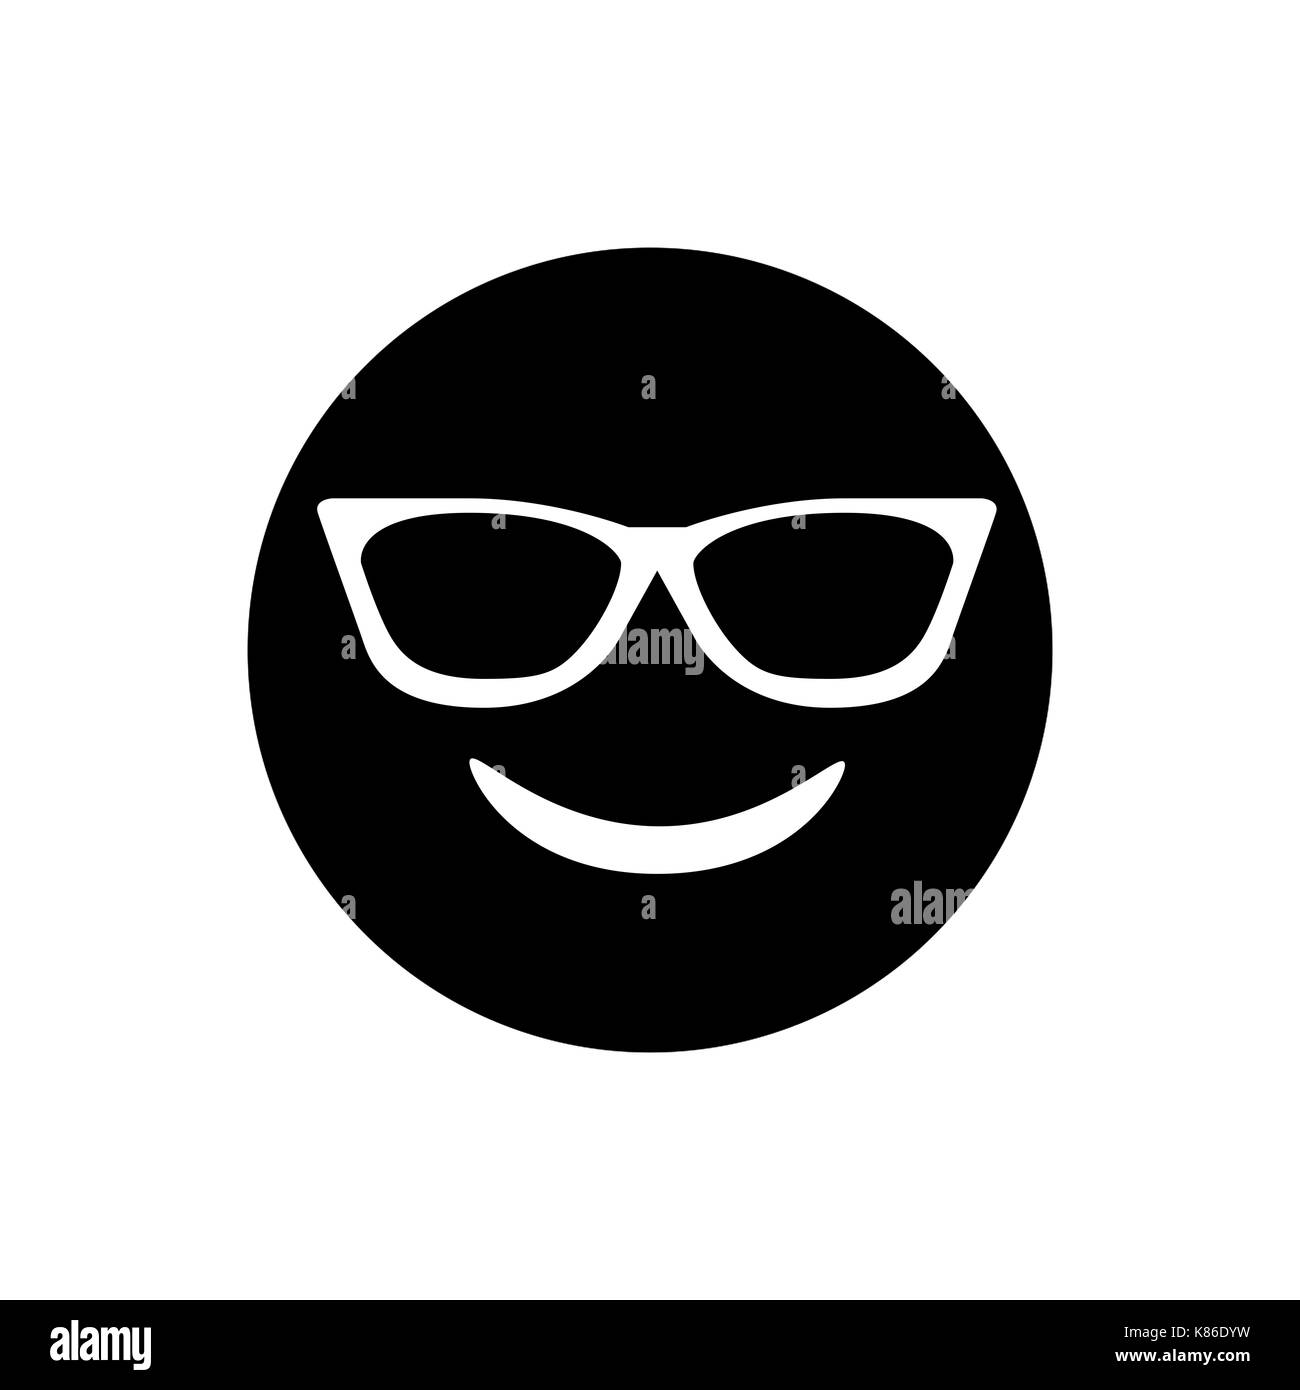 The black smiley face with sunglasses icon Stock Photo